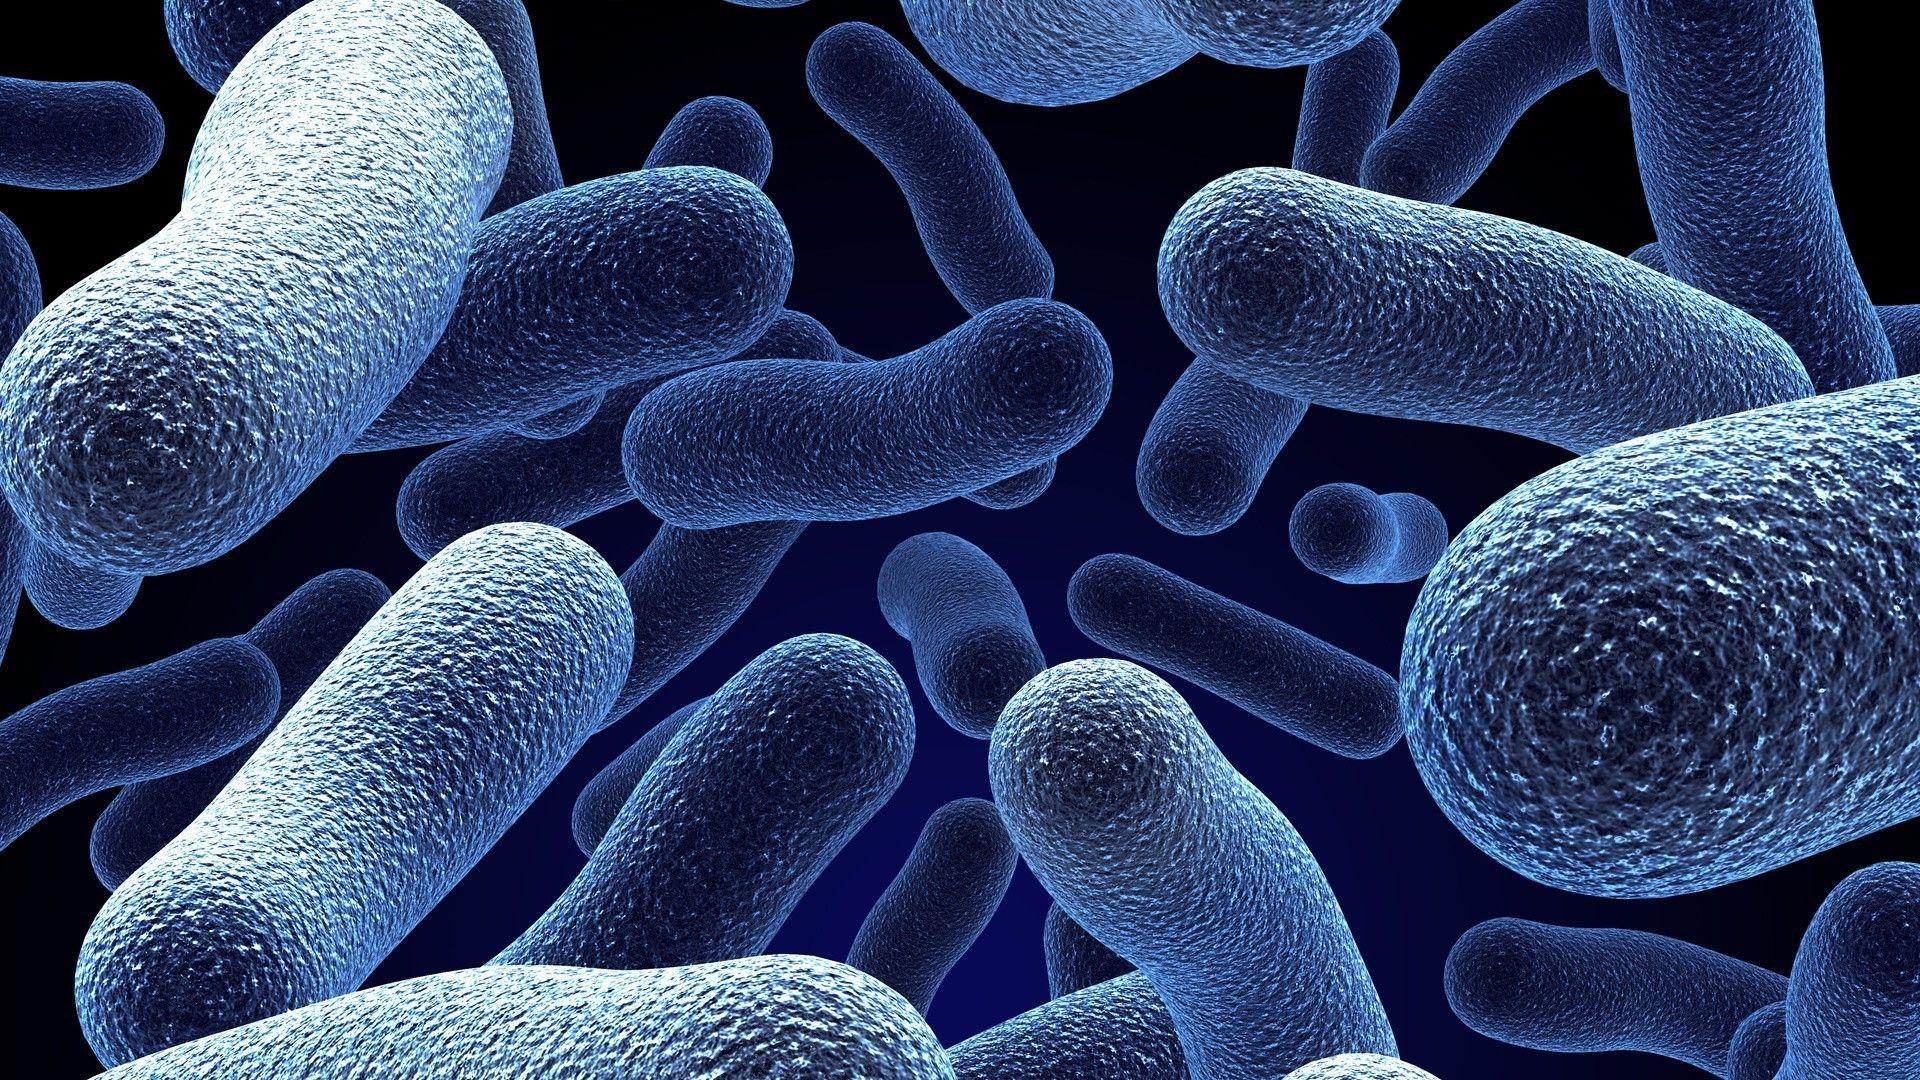 Microorganisms. Android wallpaper for free